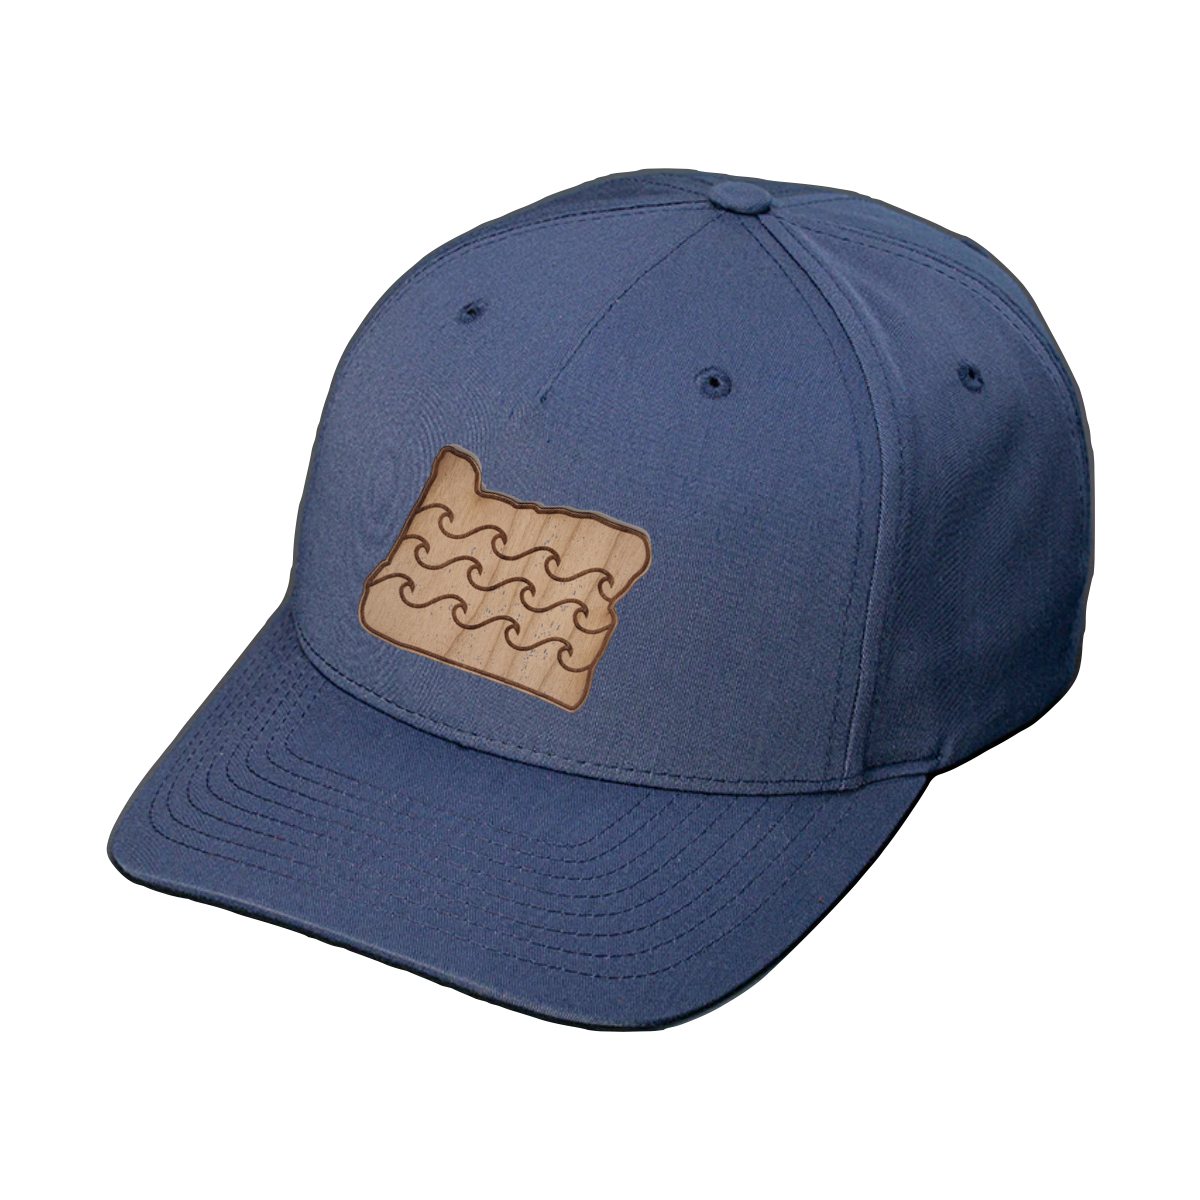 Wood Patch - Water Ways Snapback Hat